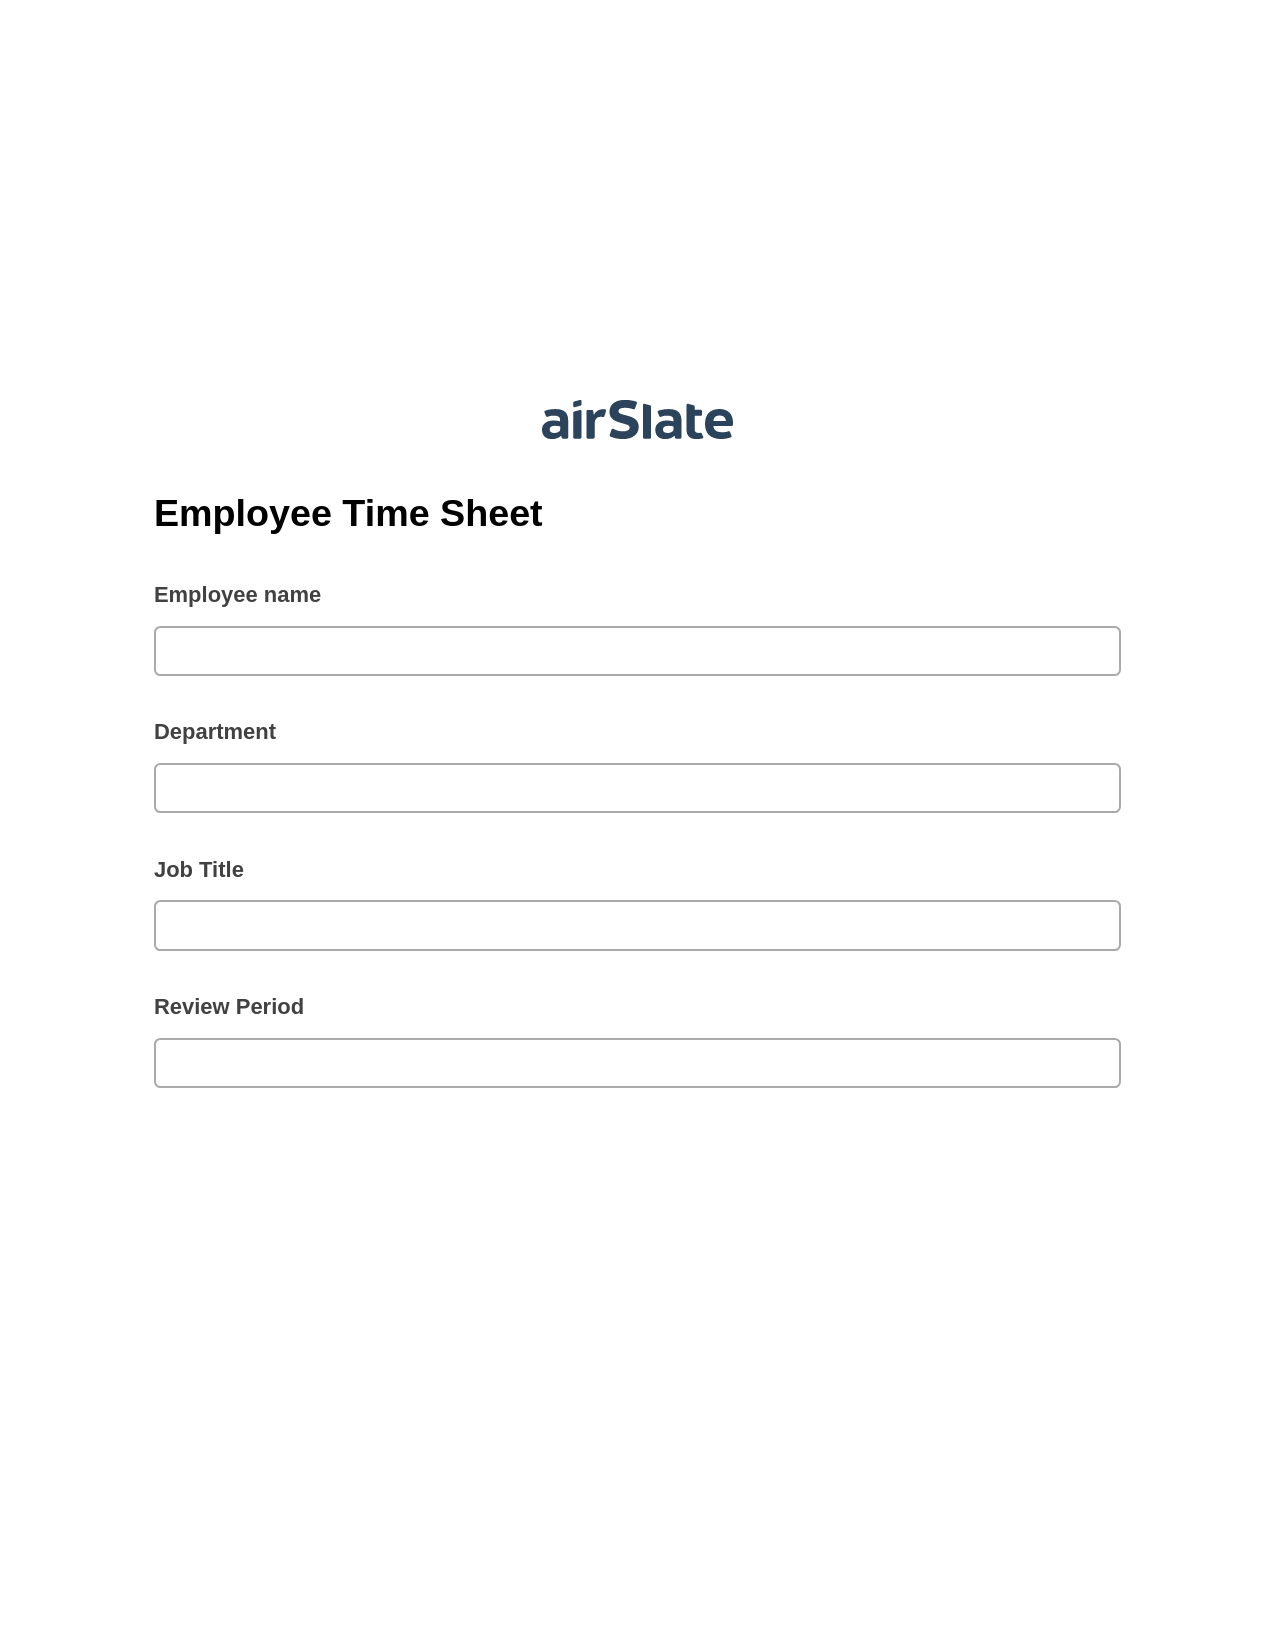 Employee Time Sheet Pre-fill from Salesforce Records with SOQL Bot, Create slate addon, Archive to Dropbox Bot